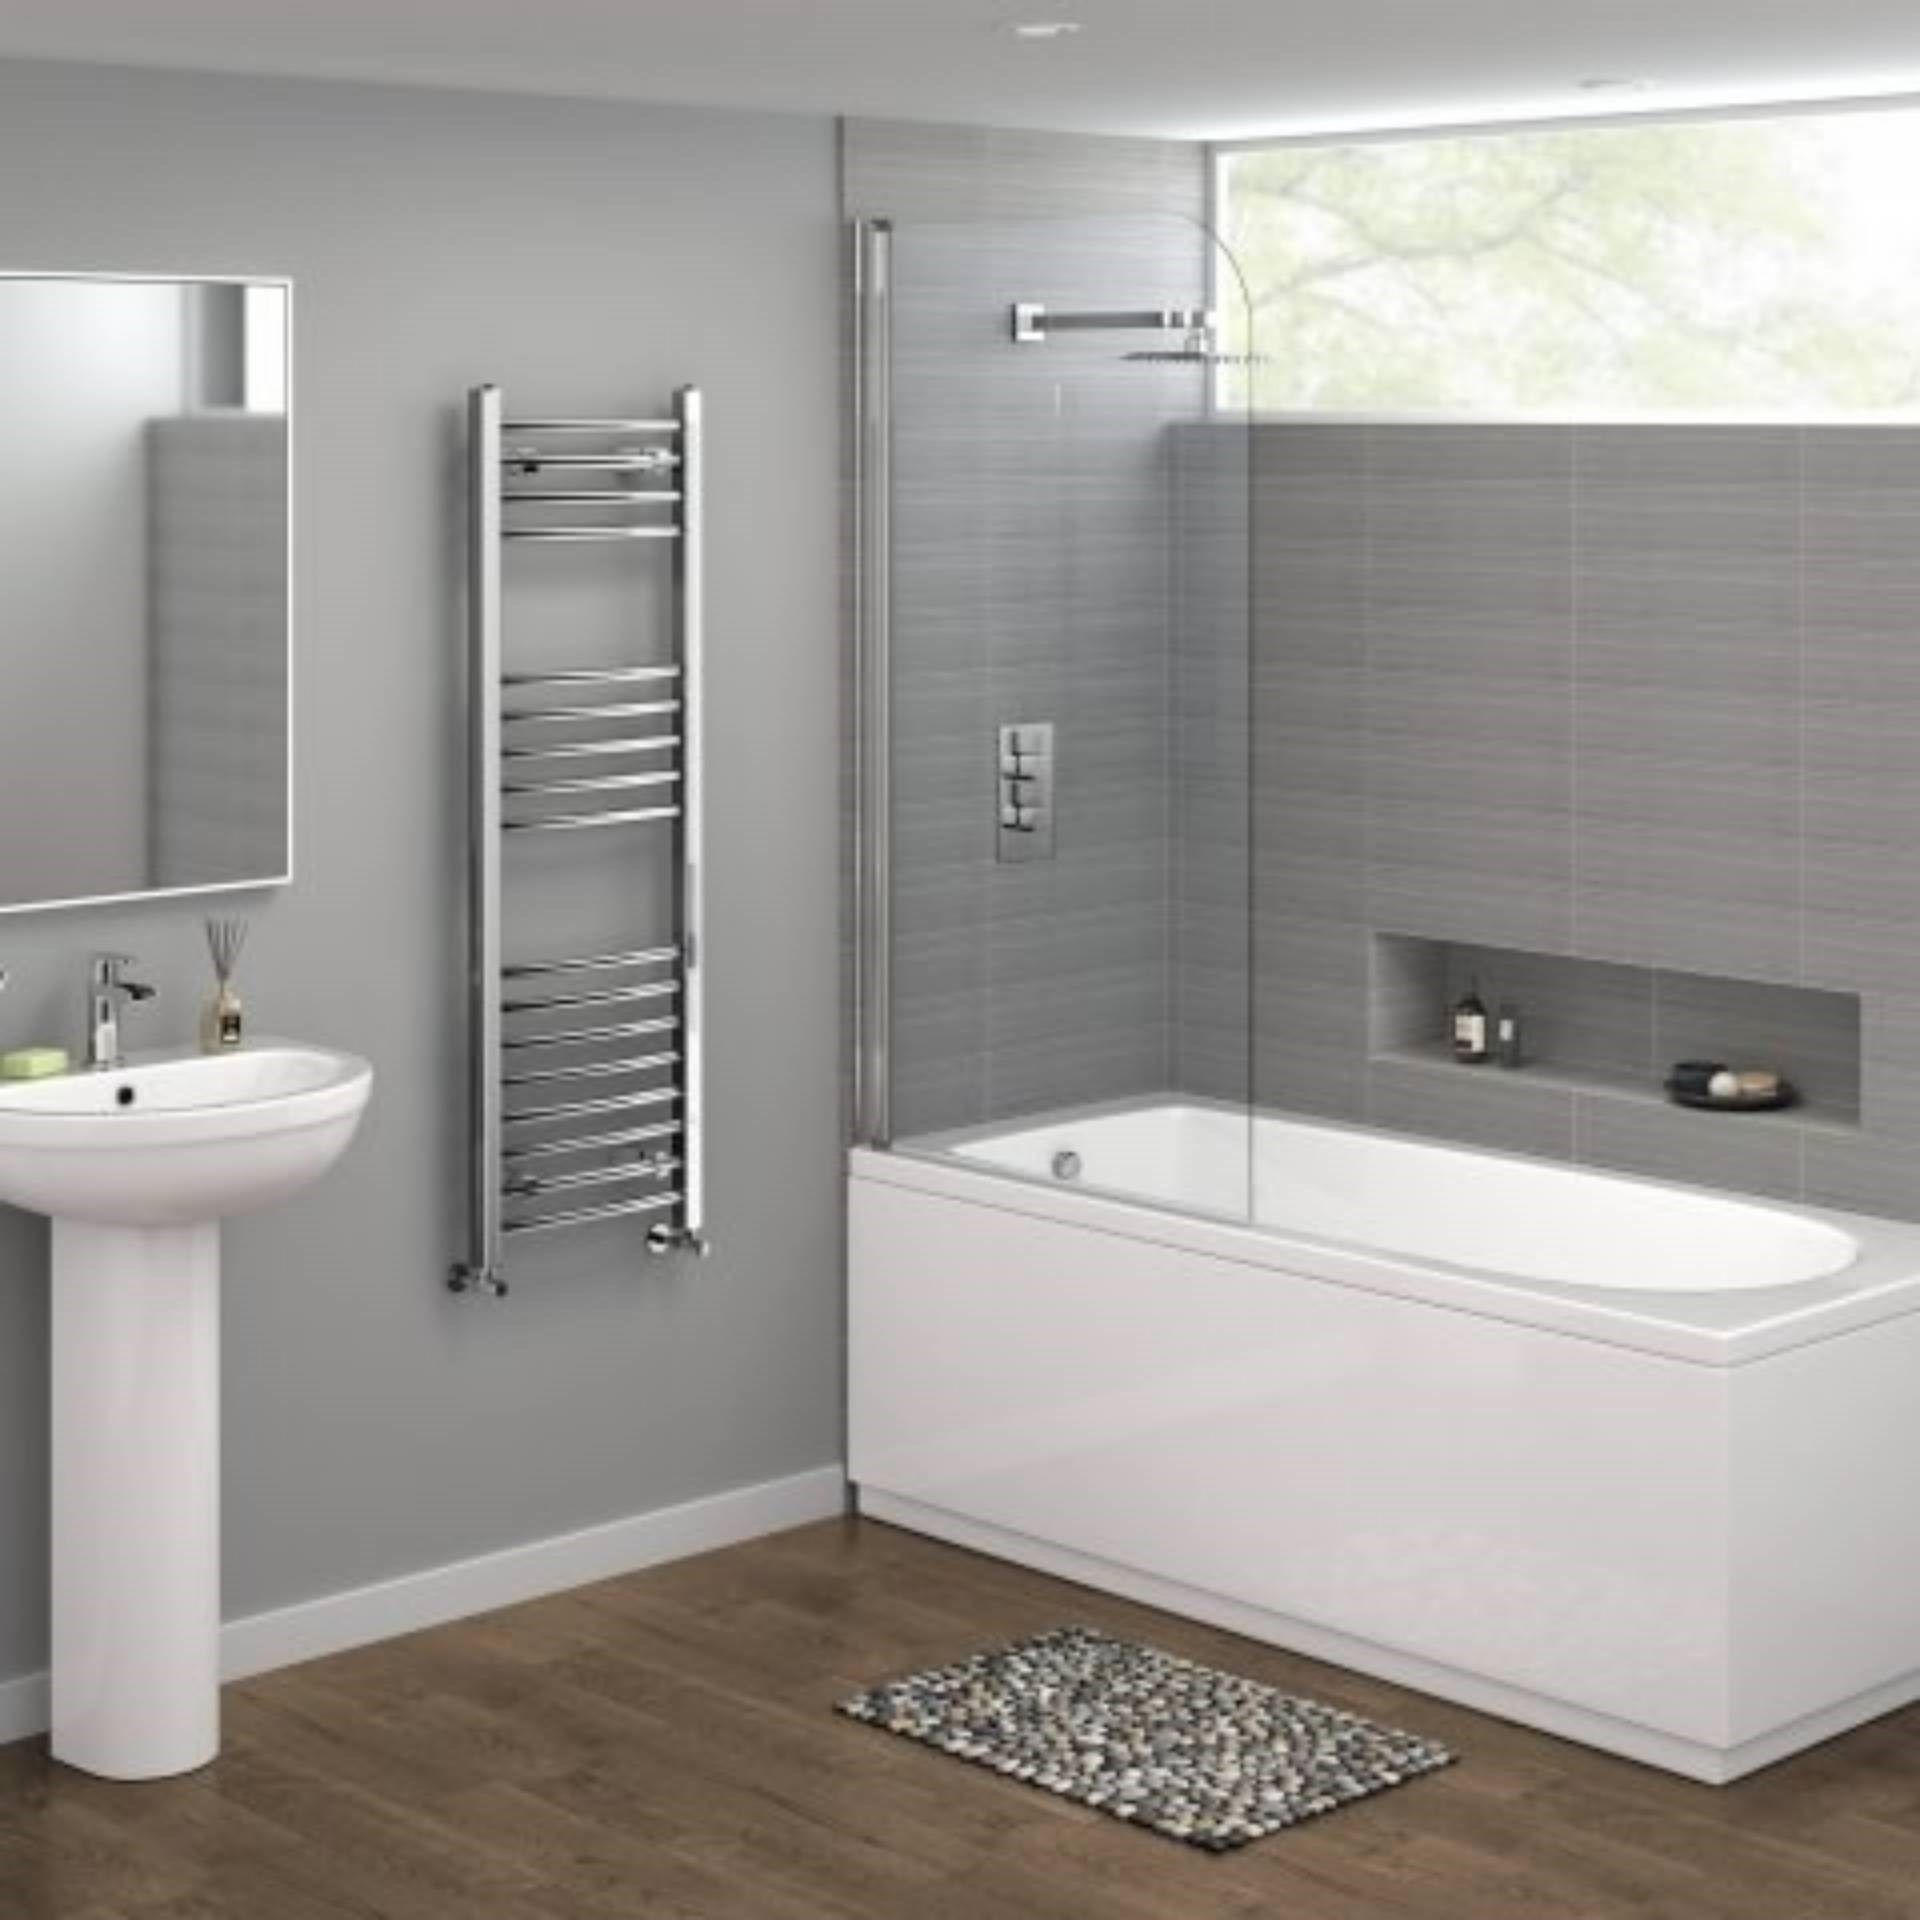 New 1200x400mm - 20mm Tubes - Chrome Curved Rail Ladder Towel Radiator. Nc1200400.Our Nancy 120... - Image 2 of 2